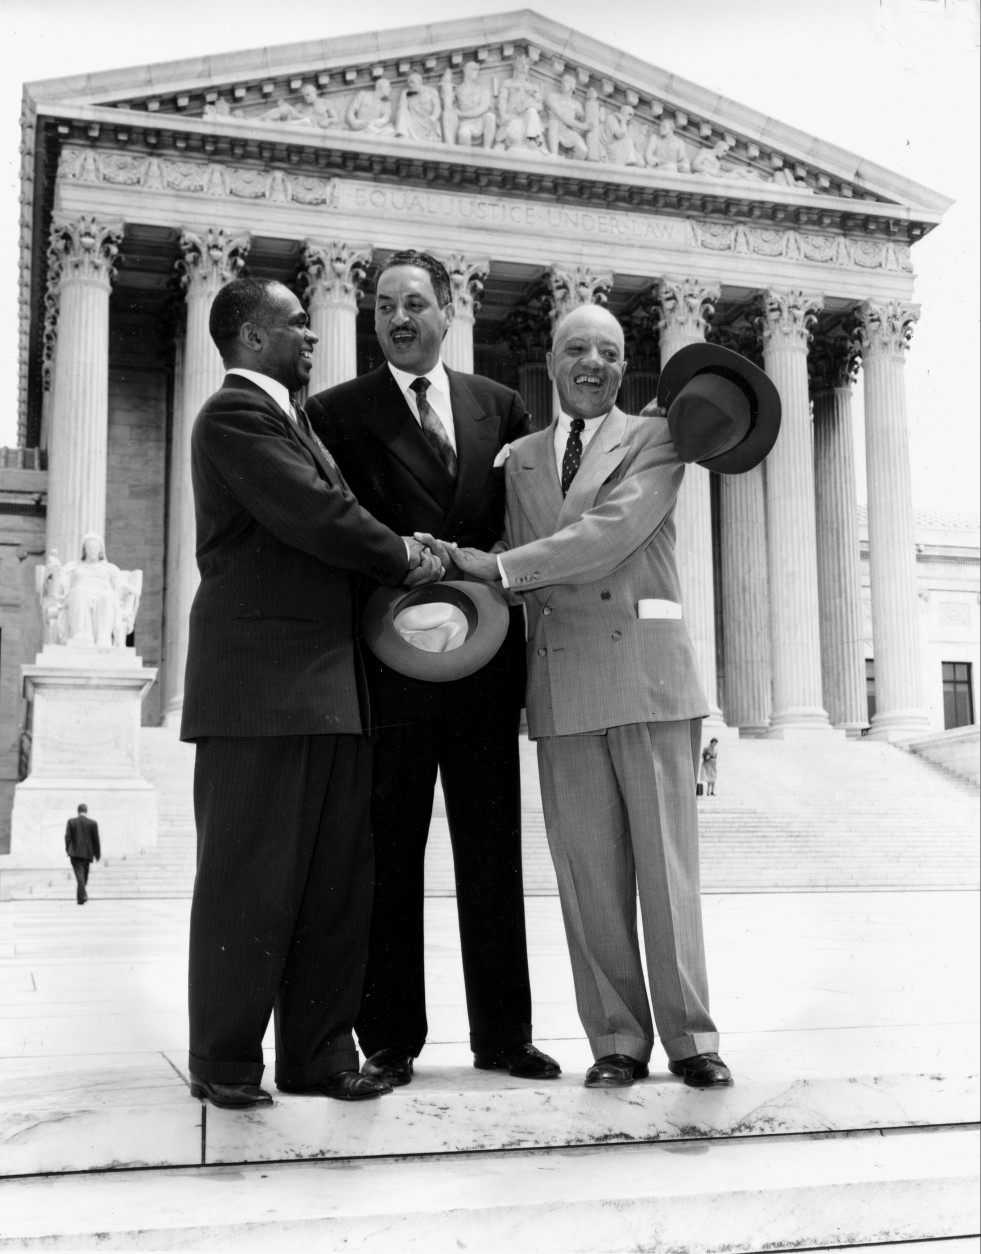 FILE - This May 17, 1954 file photo shows, from left, George E.C. Hayes, Thurgood Marshall, and James M. Nabrit joining hands as they pose outside the Supreme Court in Washington.  The three lawyers led the fight for abolition of segregation in public schools before the Supreme Court, which ruled today that segregation is unconstitutional. On May 17, 1954, a hushed crowd of spectators packed the Supreme Court, awaiting word on Brown v. Board of Education, a combination of five lawsuits brought by the NAACP's legal arm to challenge racial segregation in public schools. The high court decided unanimously that "separate but equal" education denied black children their constitutional right to equal protection under the law, effectively removing a cornerstone that propped up Jim Crow, or state-sanctioned segregation of the races. (AP Photo, File)